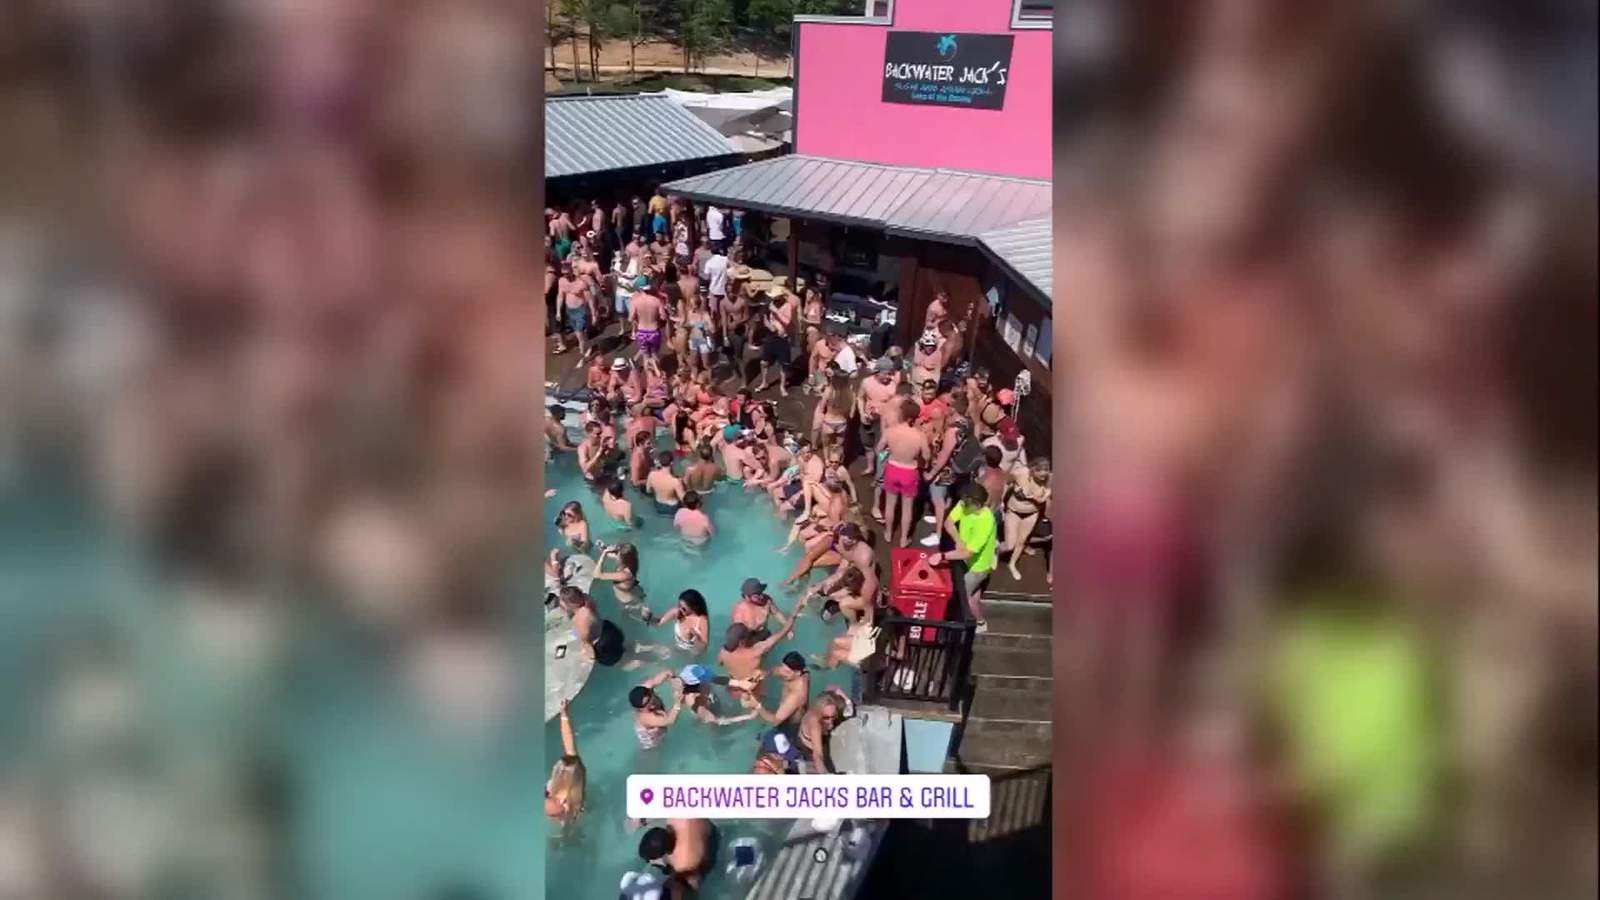 Crowd packs pool party in Ozarks despite social distancing recommendations